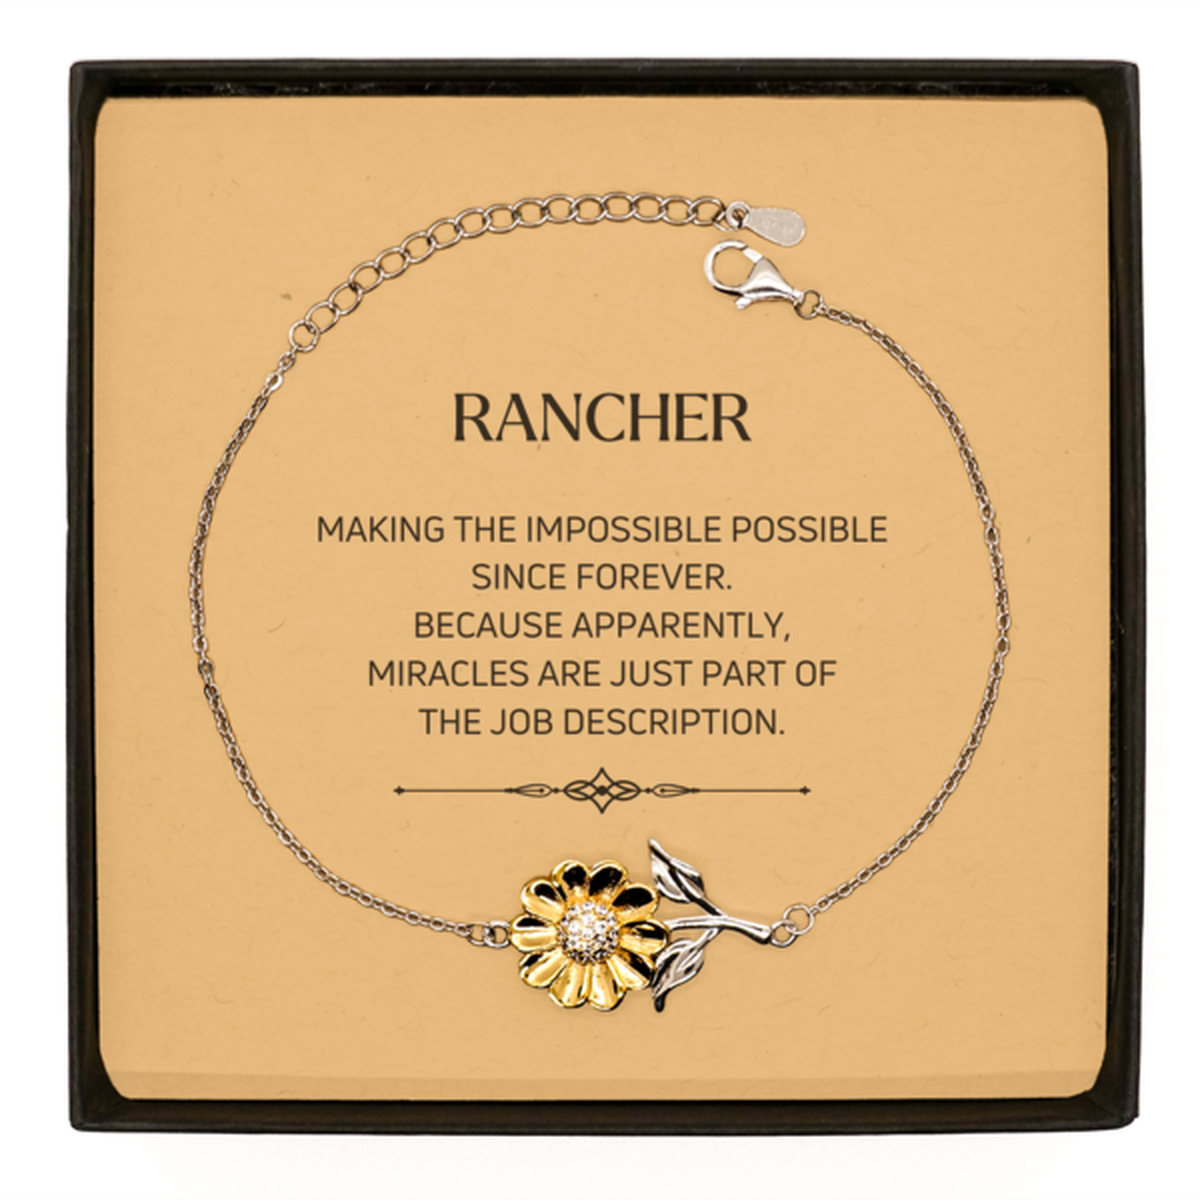 Funny Rancher Gifts, Miracles are just part of the job description, Inspirational Birthday Sunflower Bracelet For Rancher, Men, Women, Coworkers, Friends, Boss